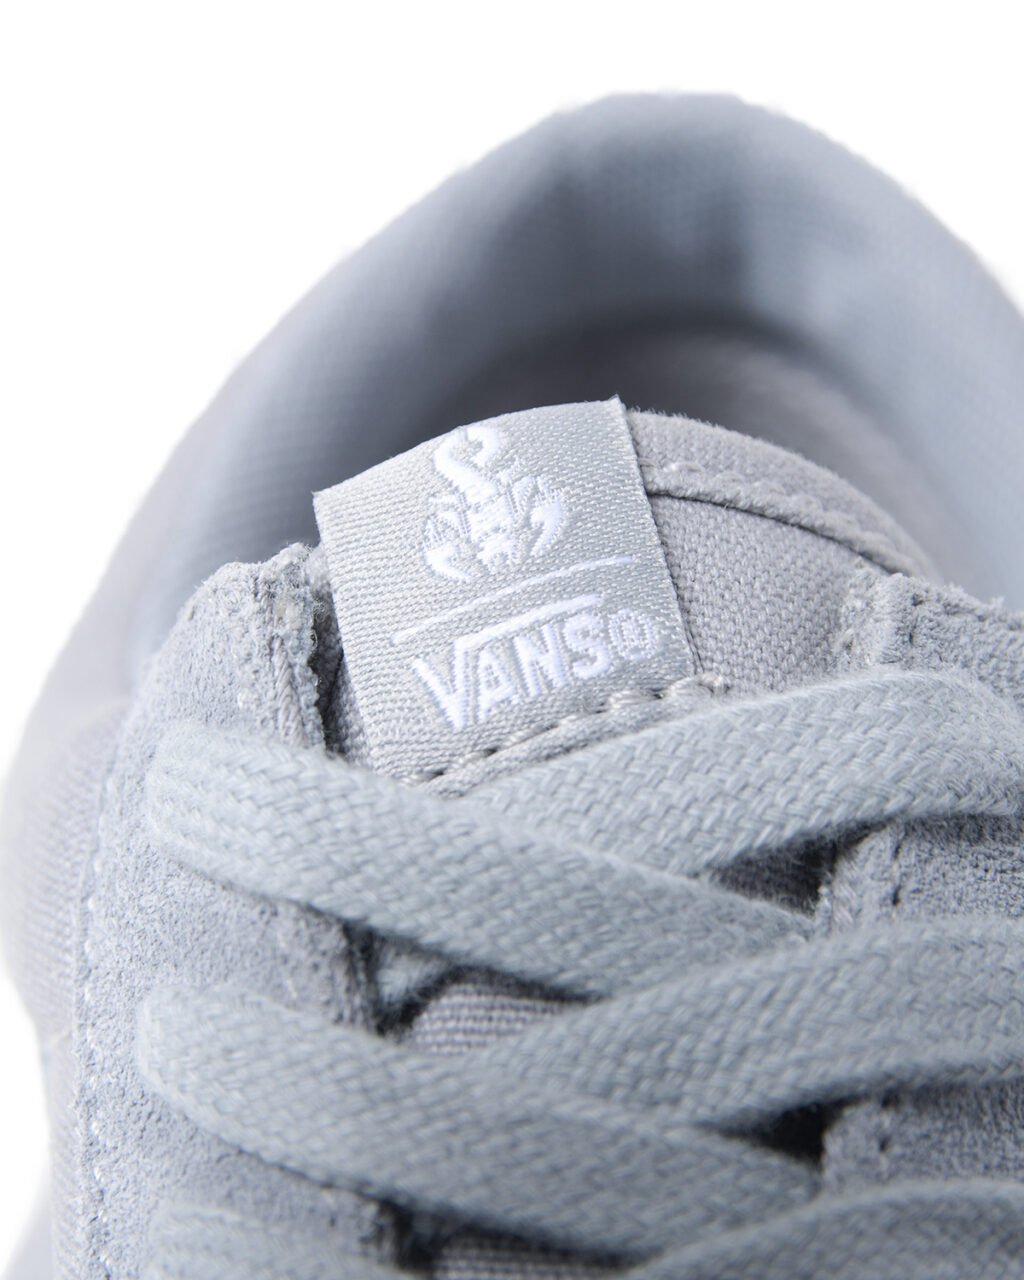 SOPHNET. and Vans Unveil Collaborative Versions of the Old Skool